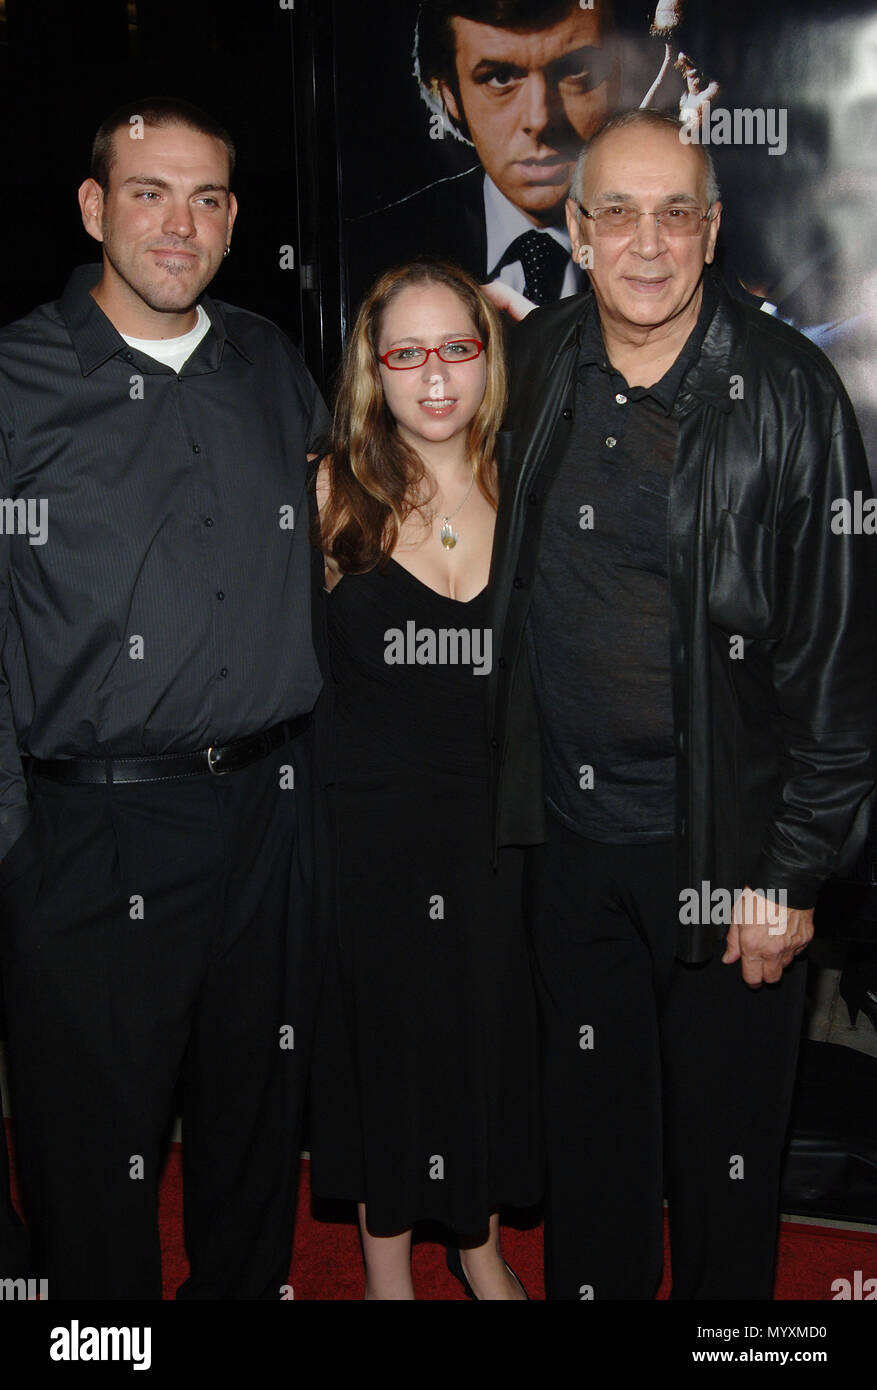 Frank Langella with daughter Sarah and friend Josh - Frost/Nixon Premiere at the Samuel Goldwyn Theatre In Los Angeles.LangellaFrank Sarah Josh 52  Event in Hollywood Life - California, Red Carpet Event, USA, Film Industry, Celebrities, Photography, Bestof, Arts Culture and Entertainment, Celebrities fashion, Best of, Hollywood Life, Event in Hollywood Life - California, Red Carpet and backstage, Music celebrities, Topix, Couple, family ( husband and wife ) and kids- Children, brothers and sisters inquiry tsuni@Gamma-USA.com, Credit Tsuni / USA, 2006 to 2009 Stock Photo